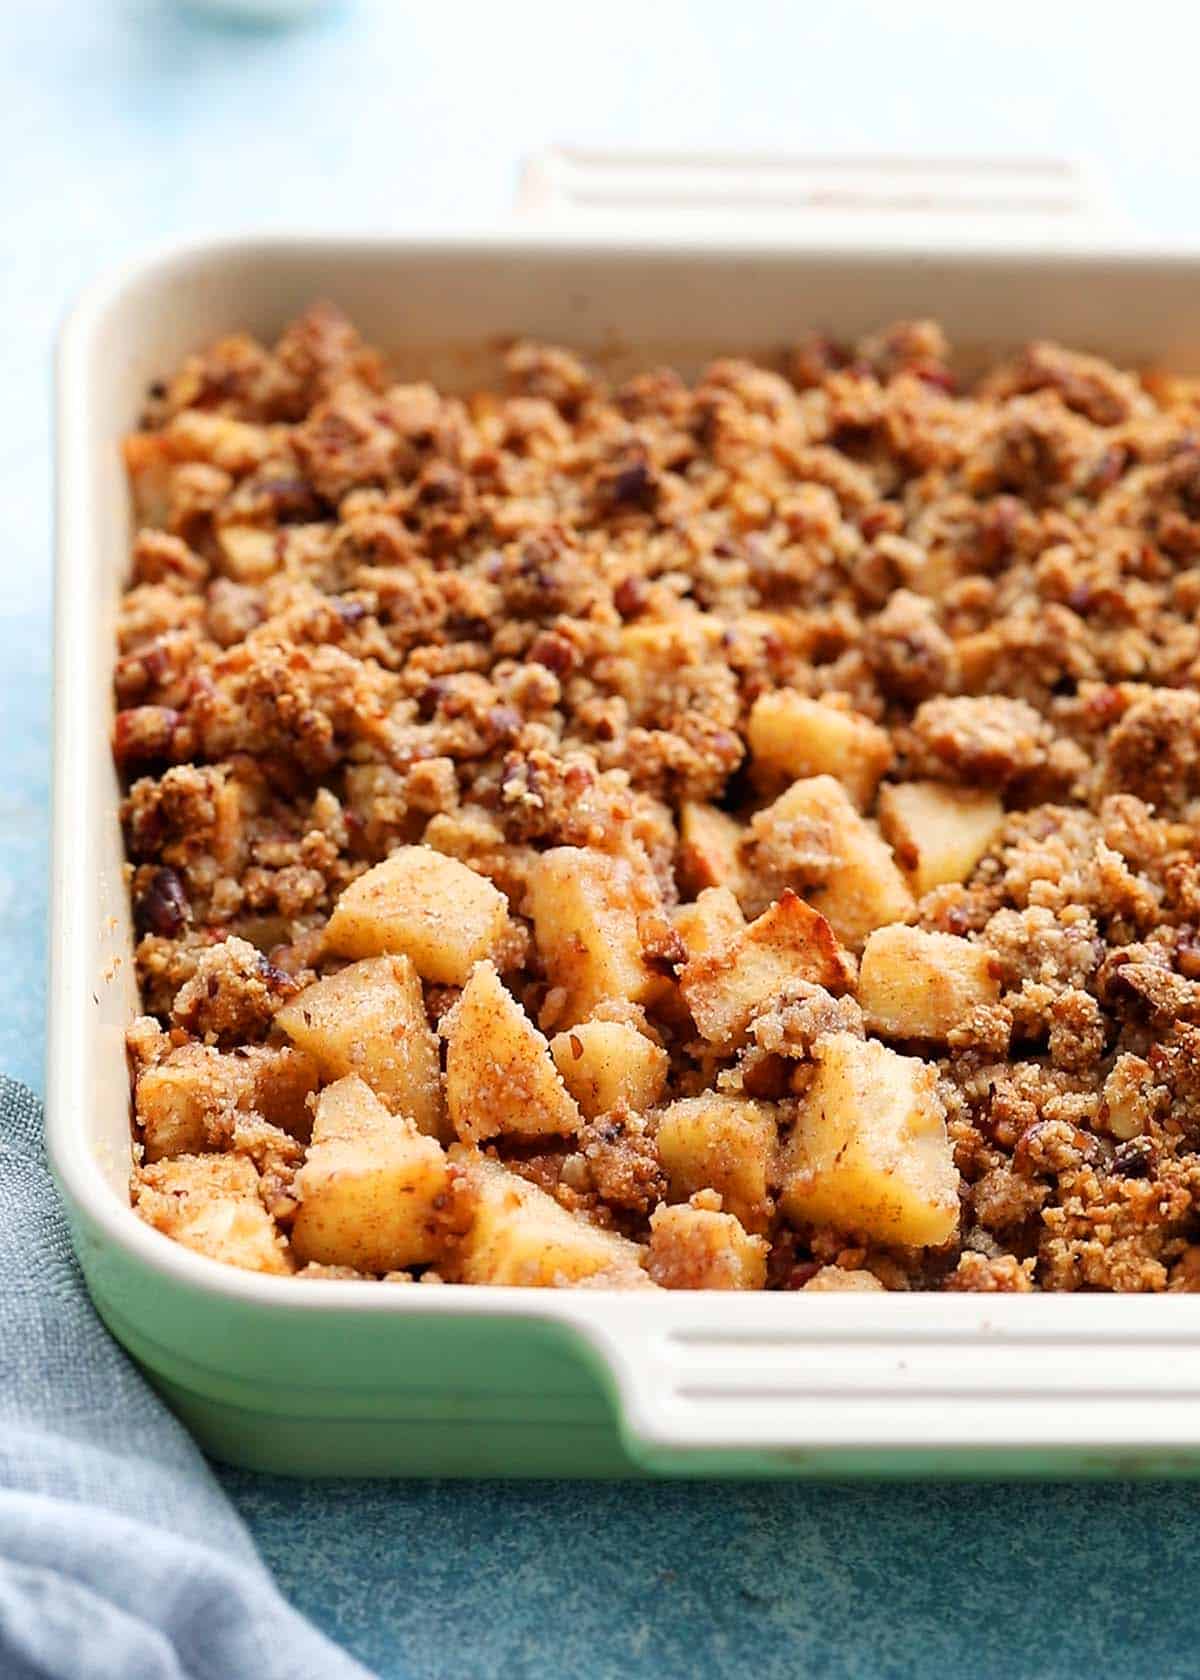 a green square baking dish with baked apple crumble.